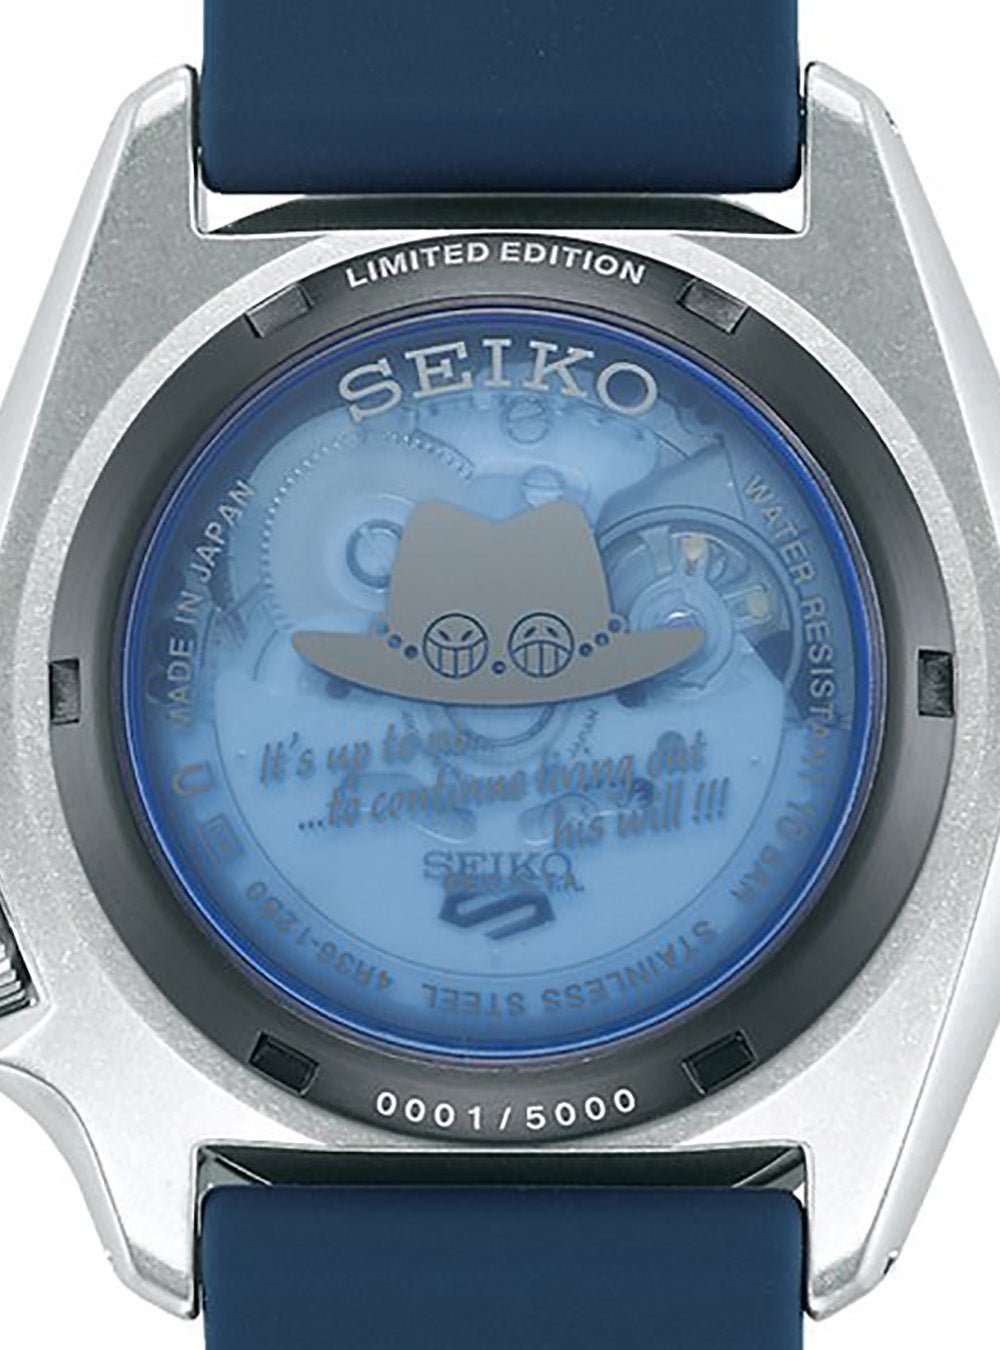 SEIKO 5 SPORTS ONE PIECE LIMITED EDITION SABO SBSA157 MADE IN JAPAN JDMWatchesjapan-select